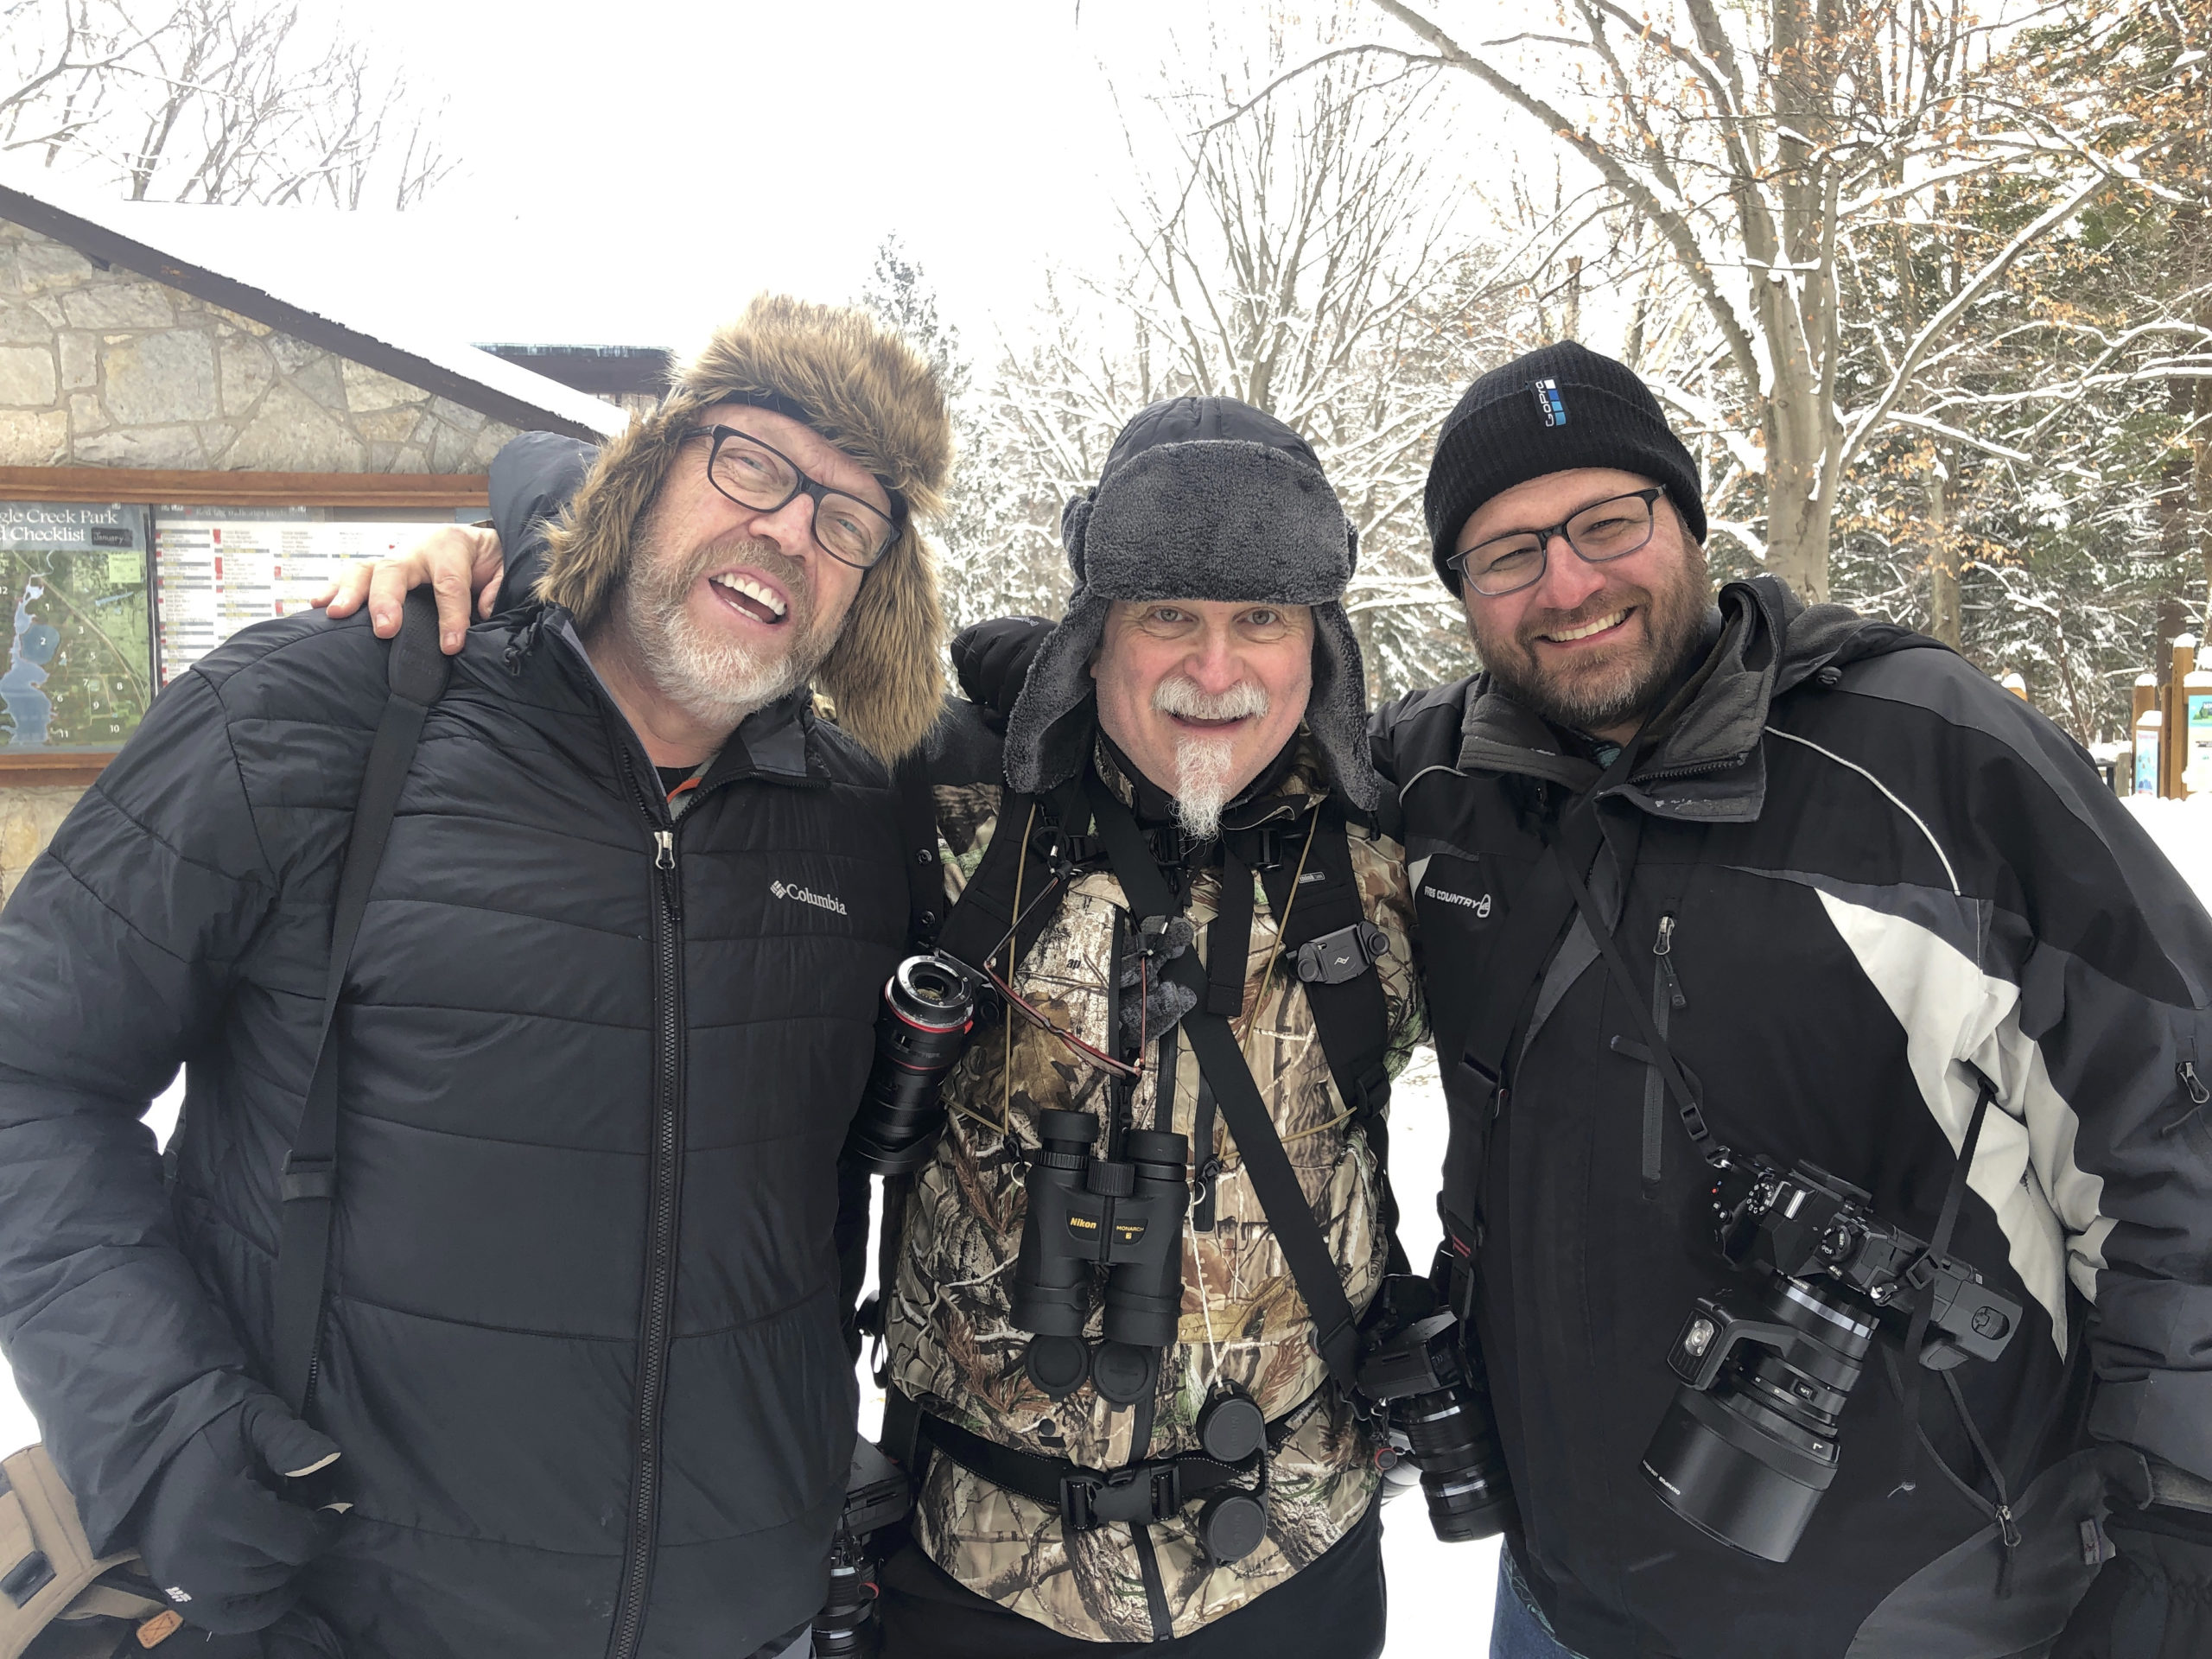 Kevin Raber, Jody Grober and Phil Gibson on our trip to photograph eagles